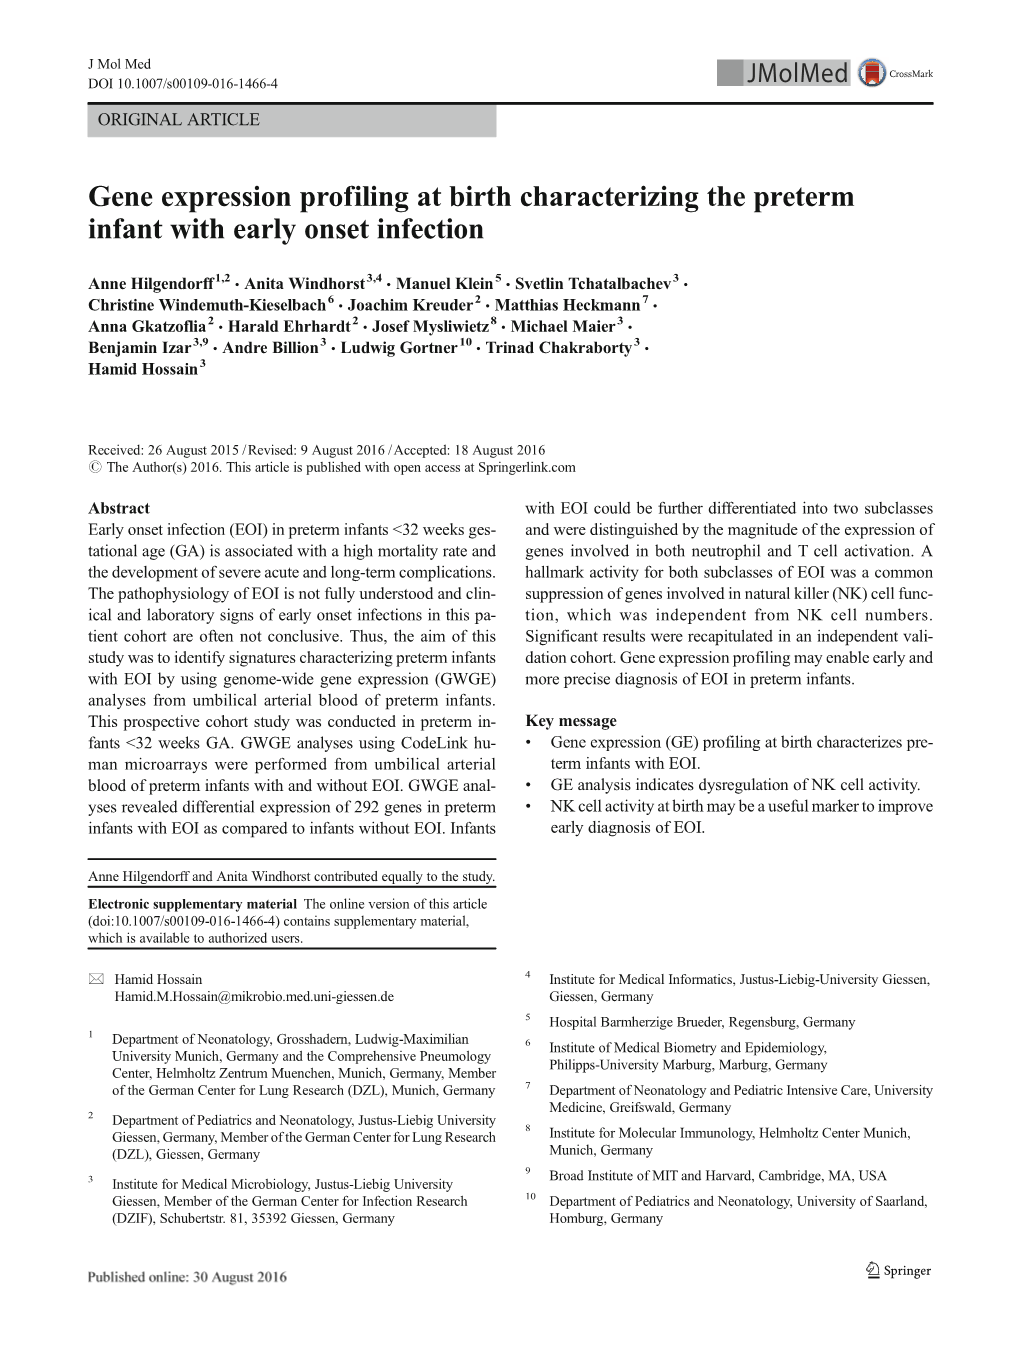 Gene Expression Profiling at Birth Characterizing the Preterm Infant with Early Onset Infection